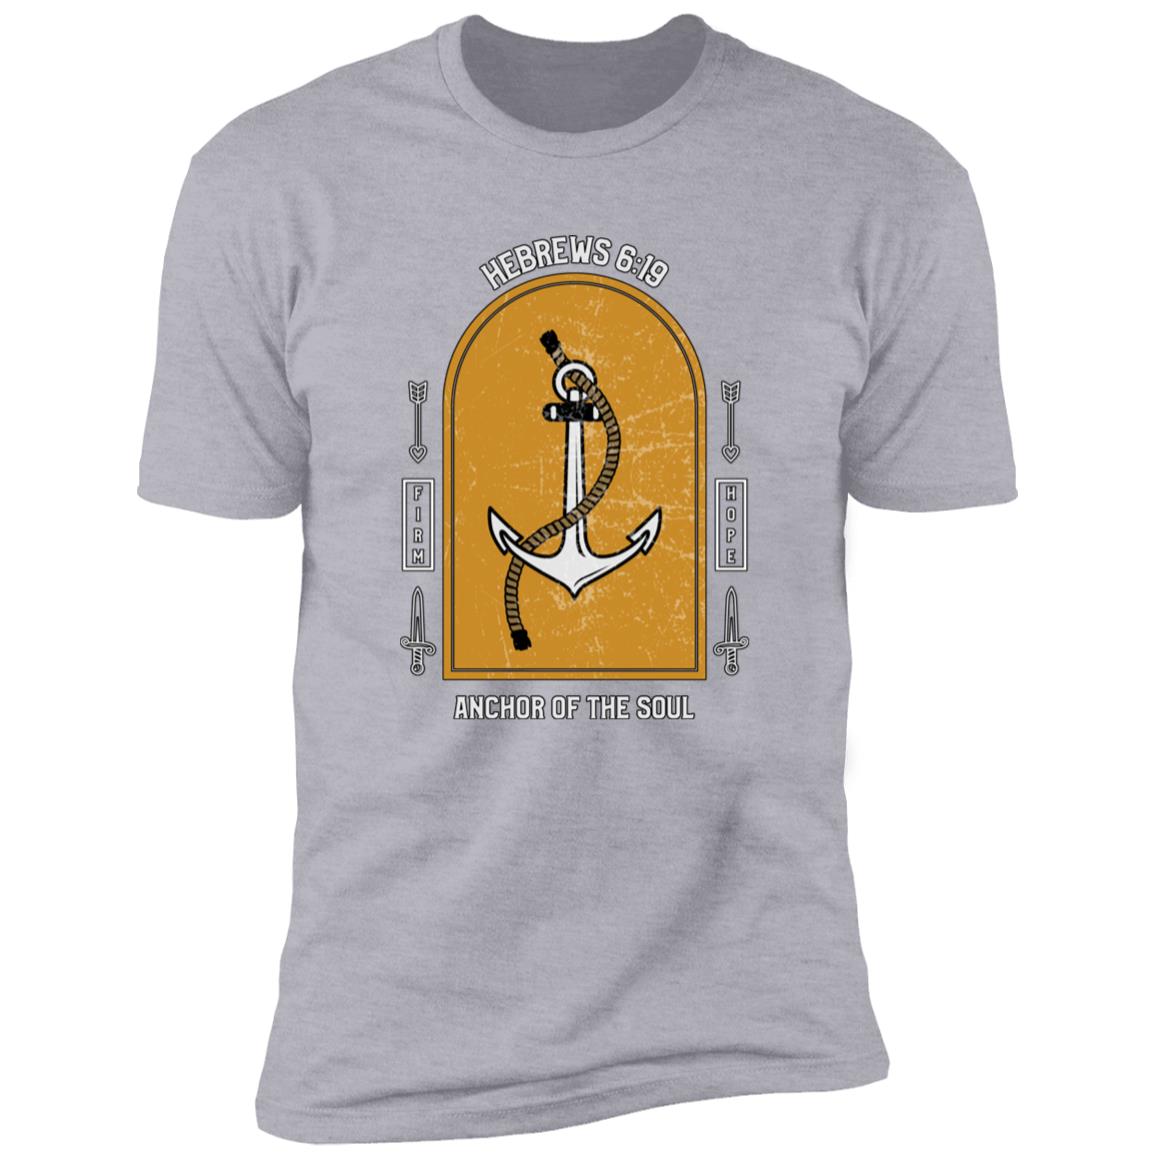 Anchor of the Soul (Unisex Tee)